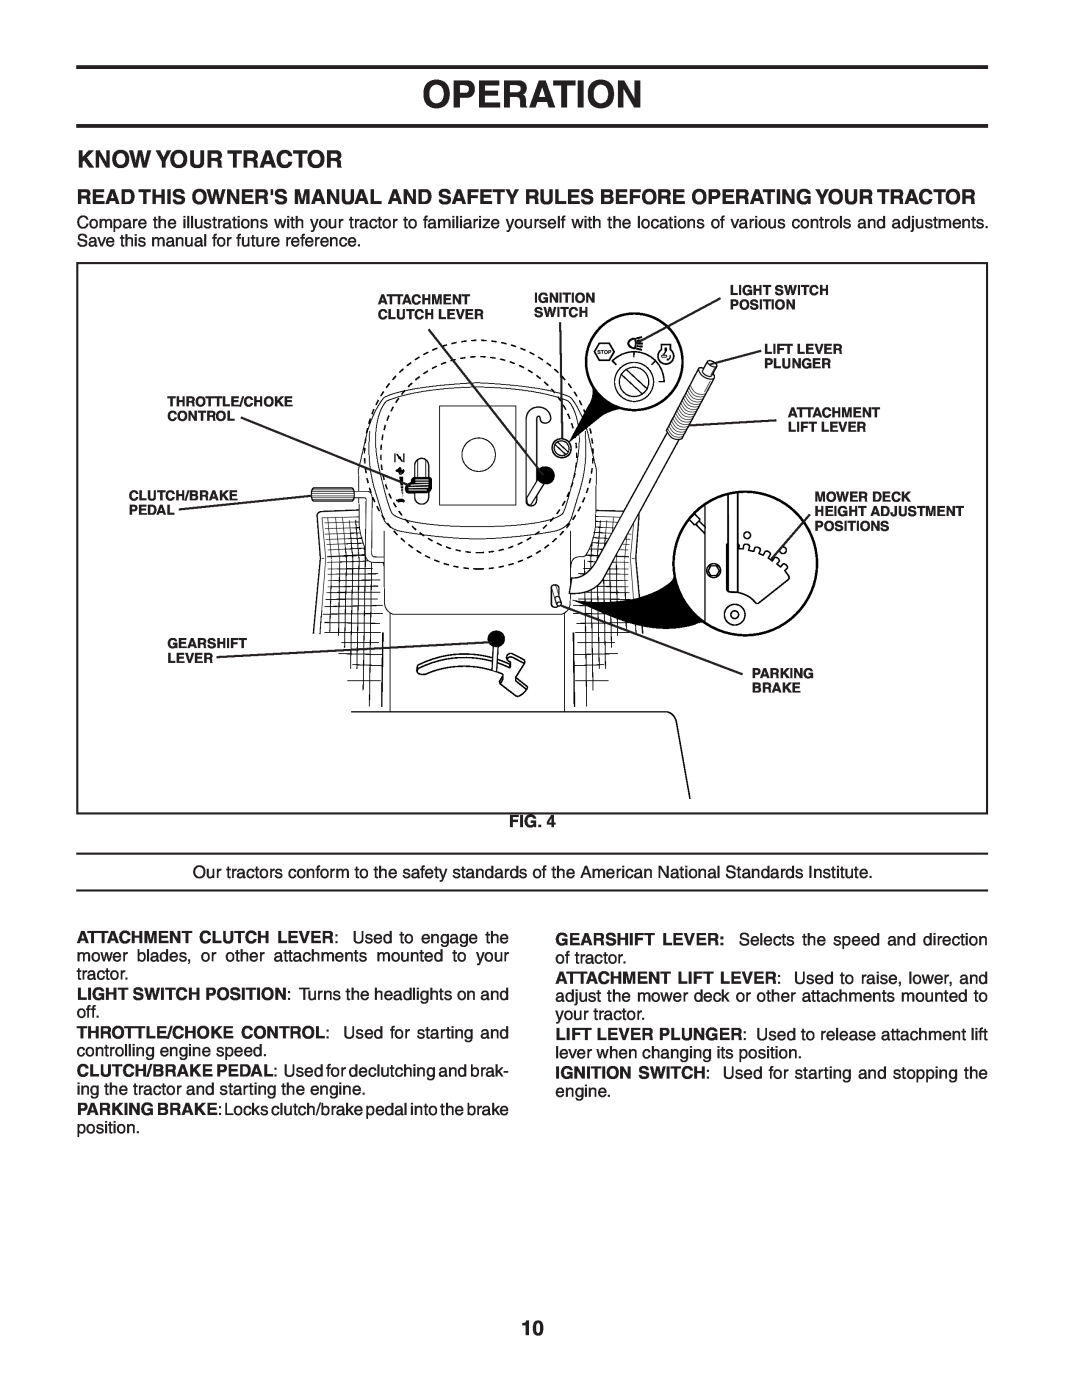 Poulan PO1538C manual Know Your Tractor, Operation 